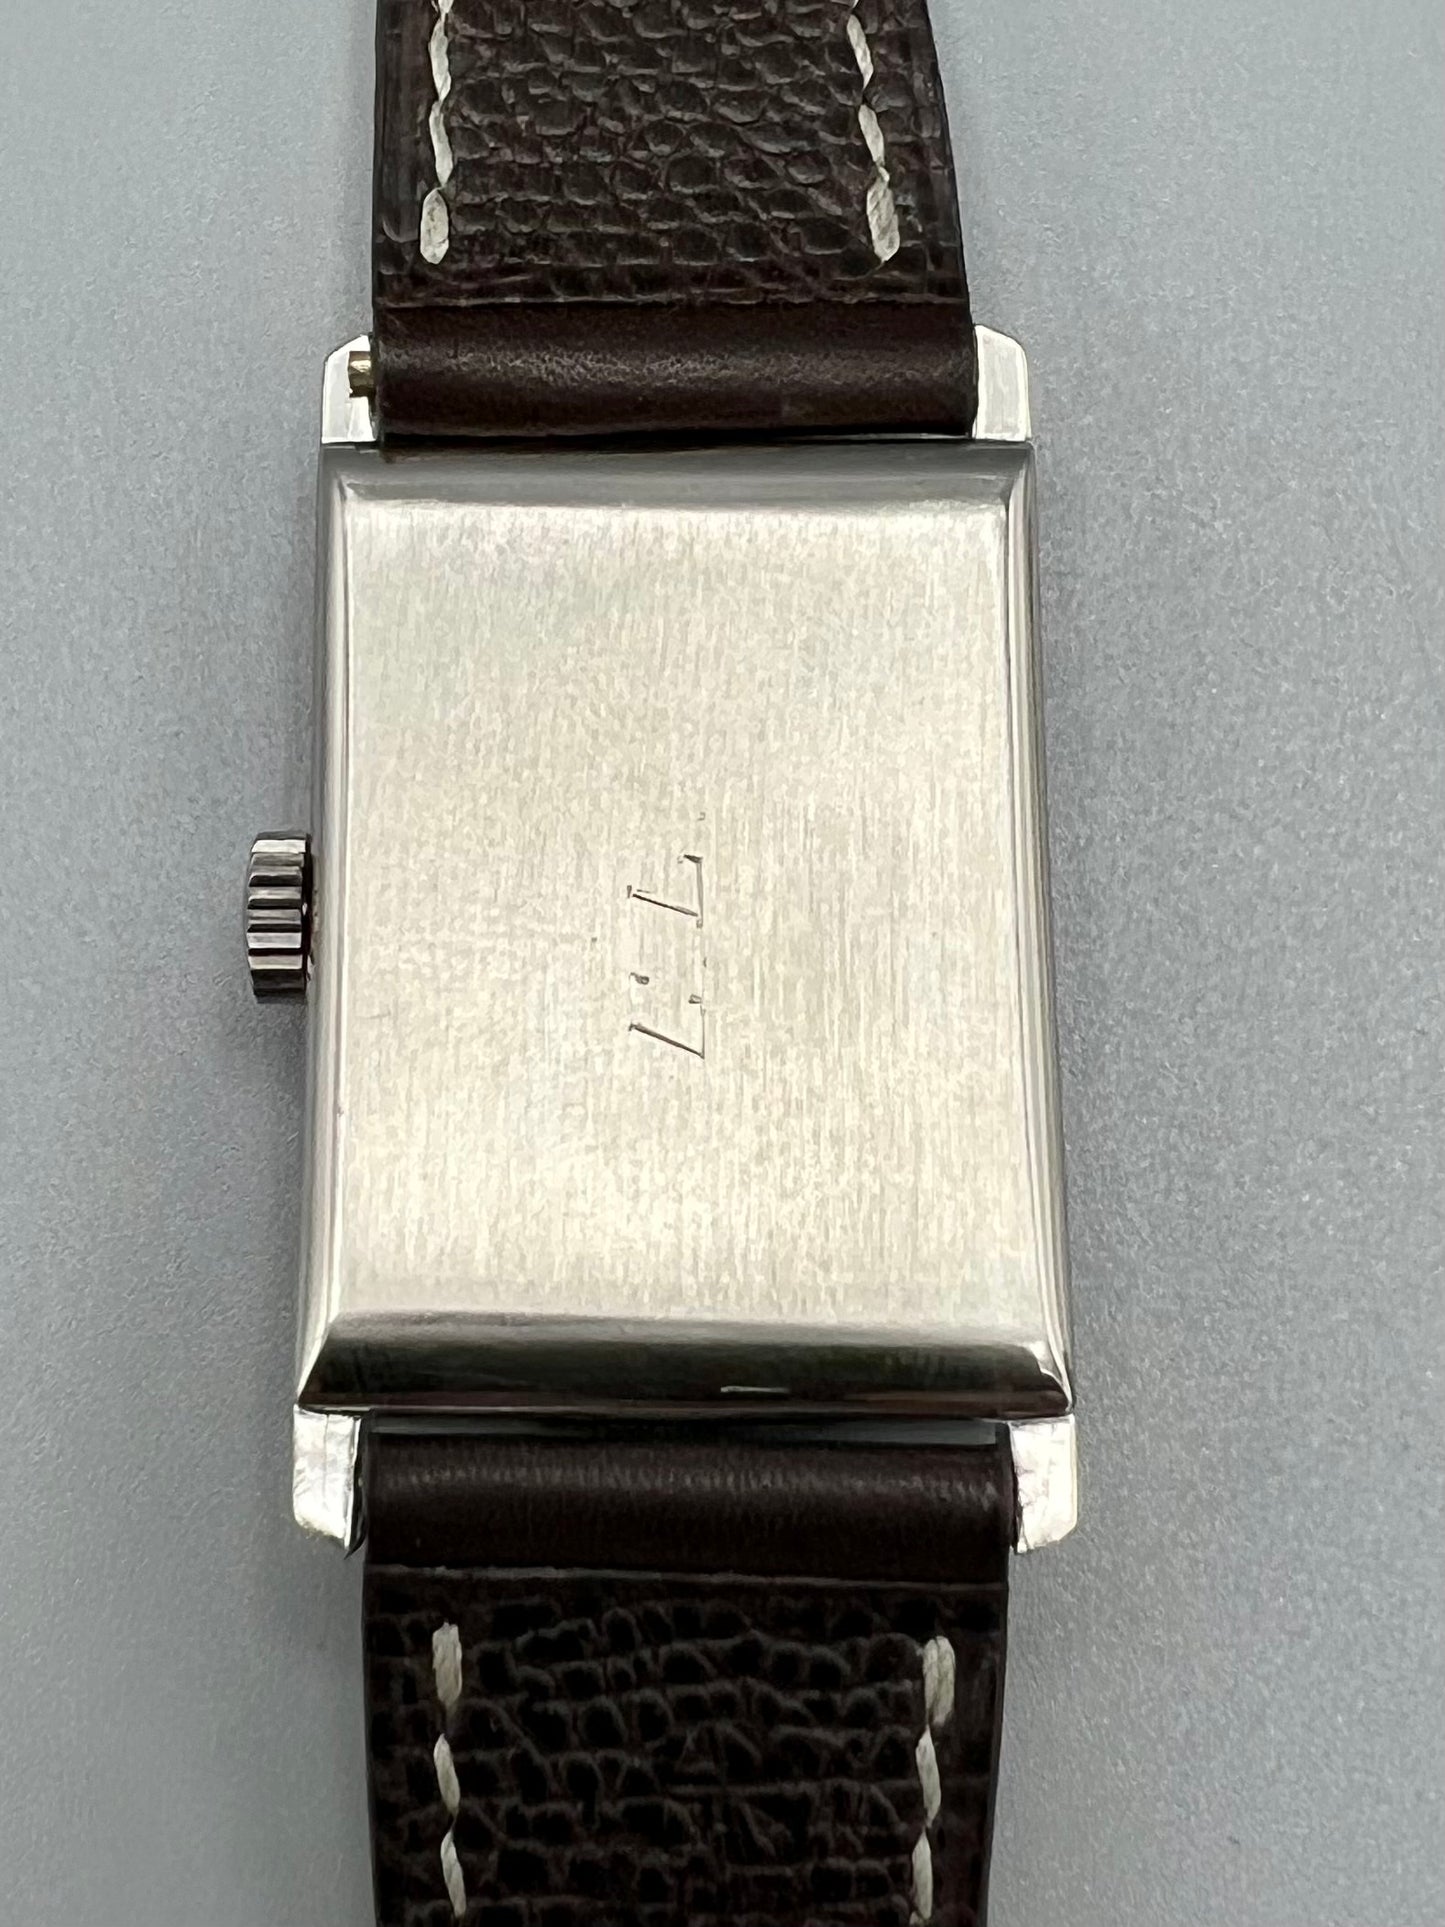 Patek Philippe Ref 450 Stainless Steel, Rare, Early Wristwatch, All Original, 1927